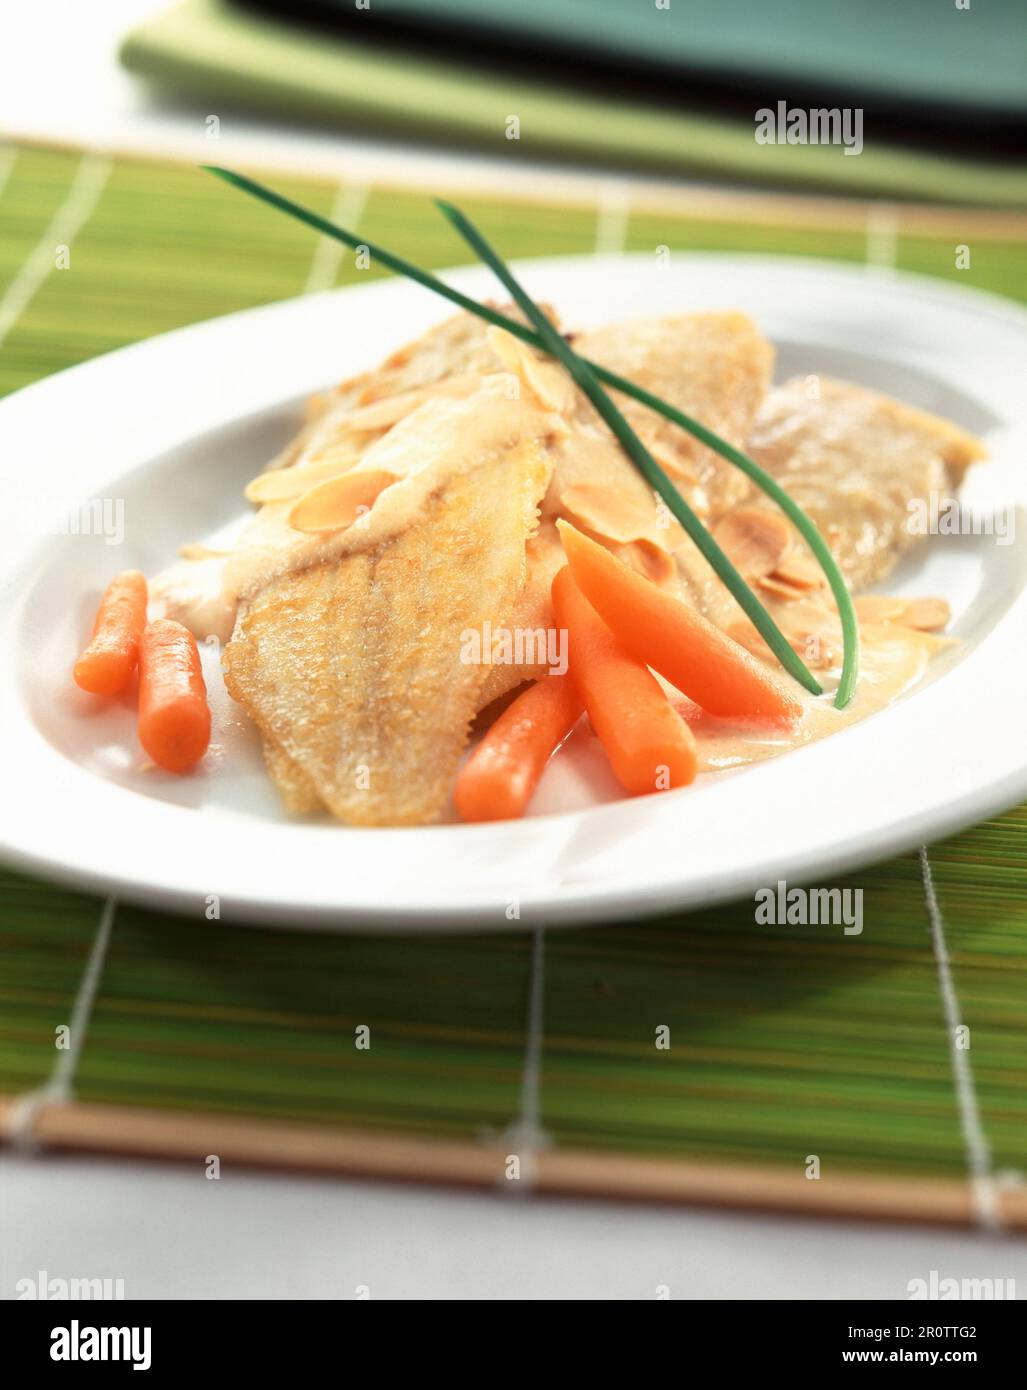 sole with almond sauce Stock Photo